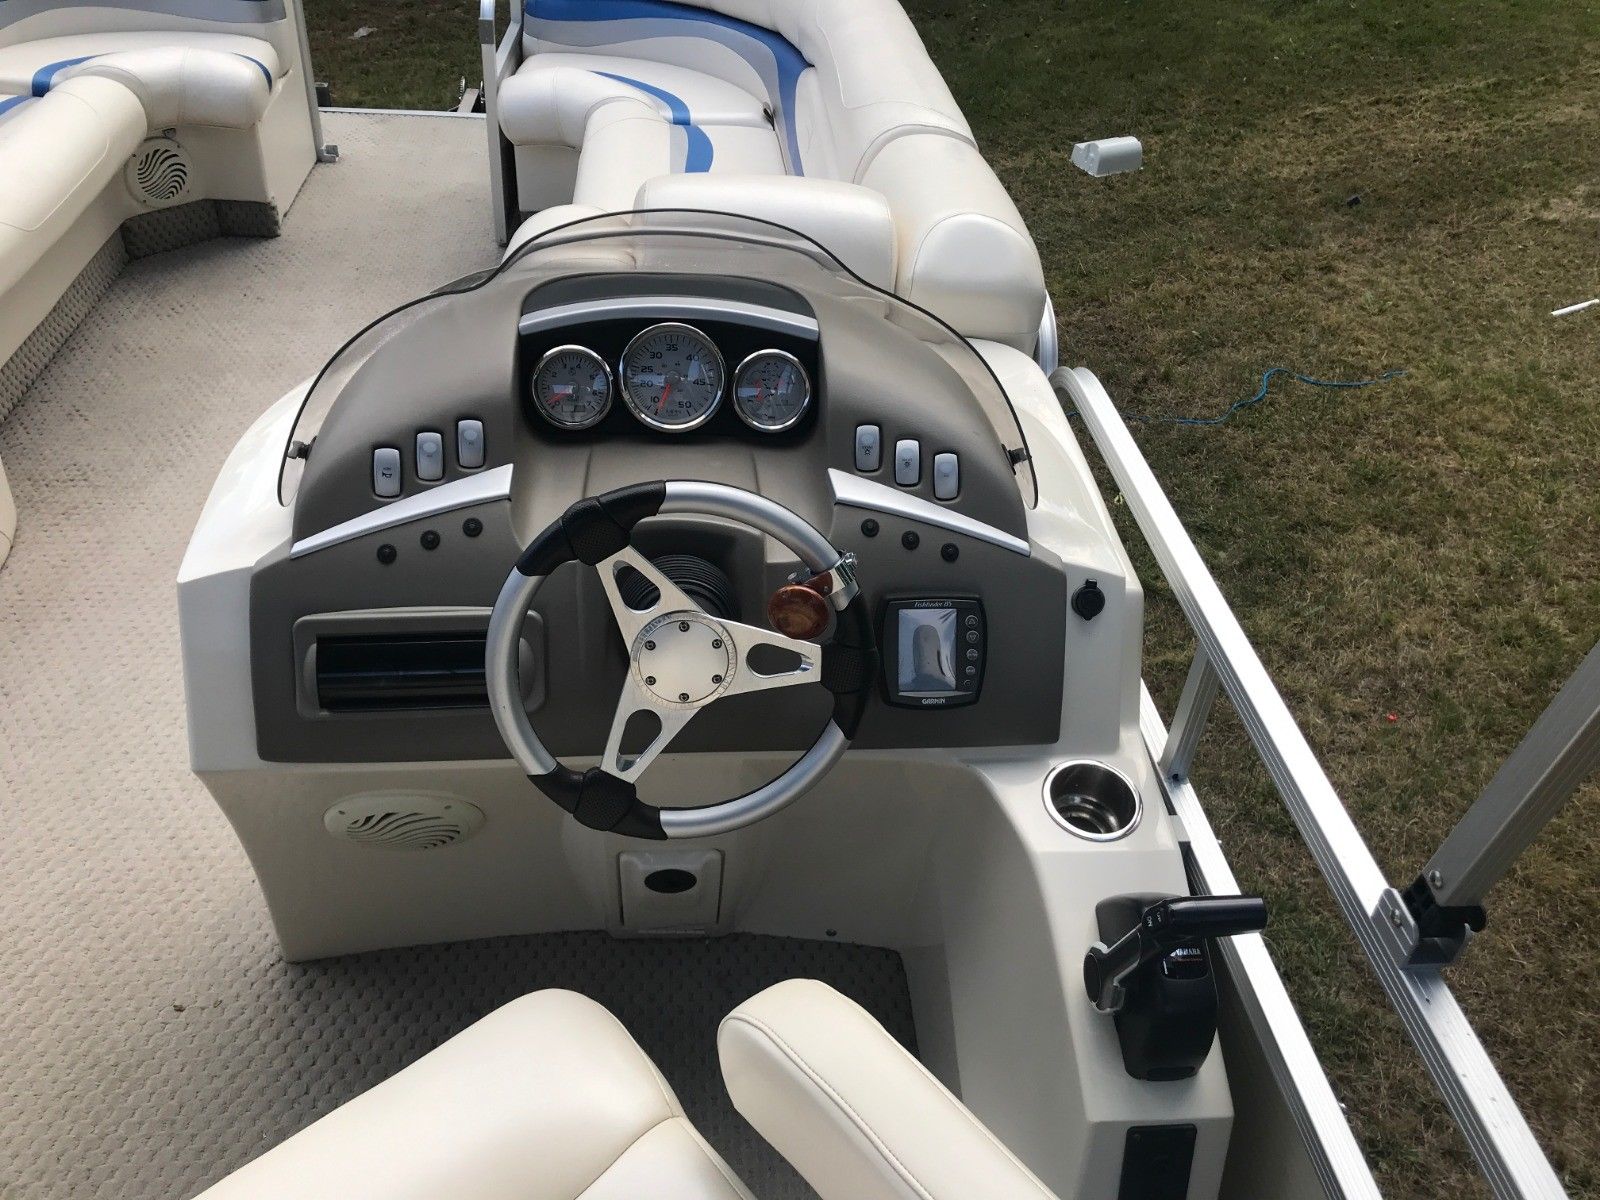 Bennington 2275 RL 2007 for sale for $17,999 - Boats-from-USA.com